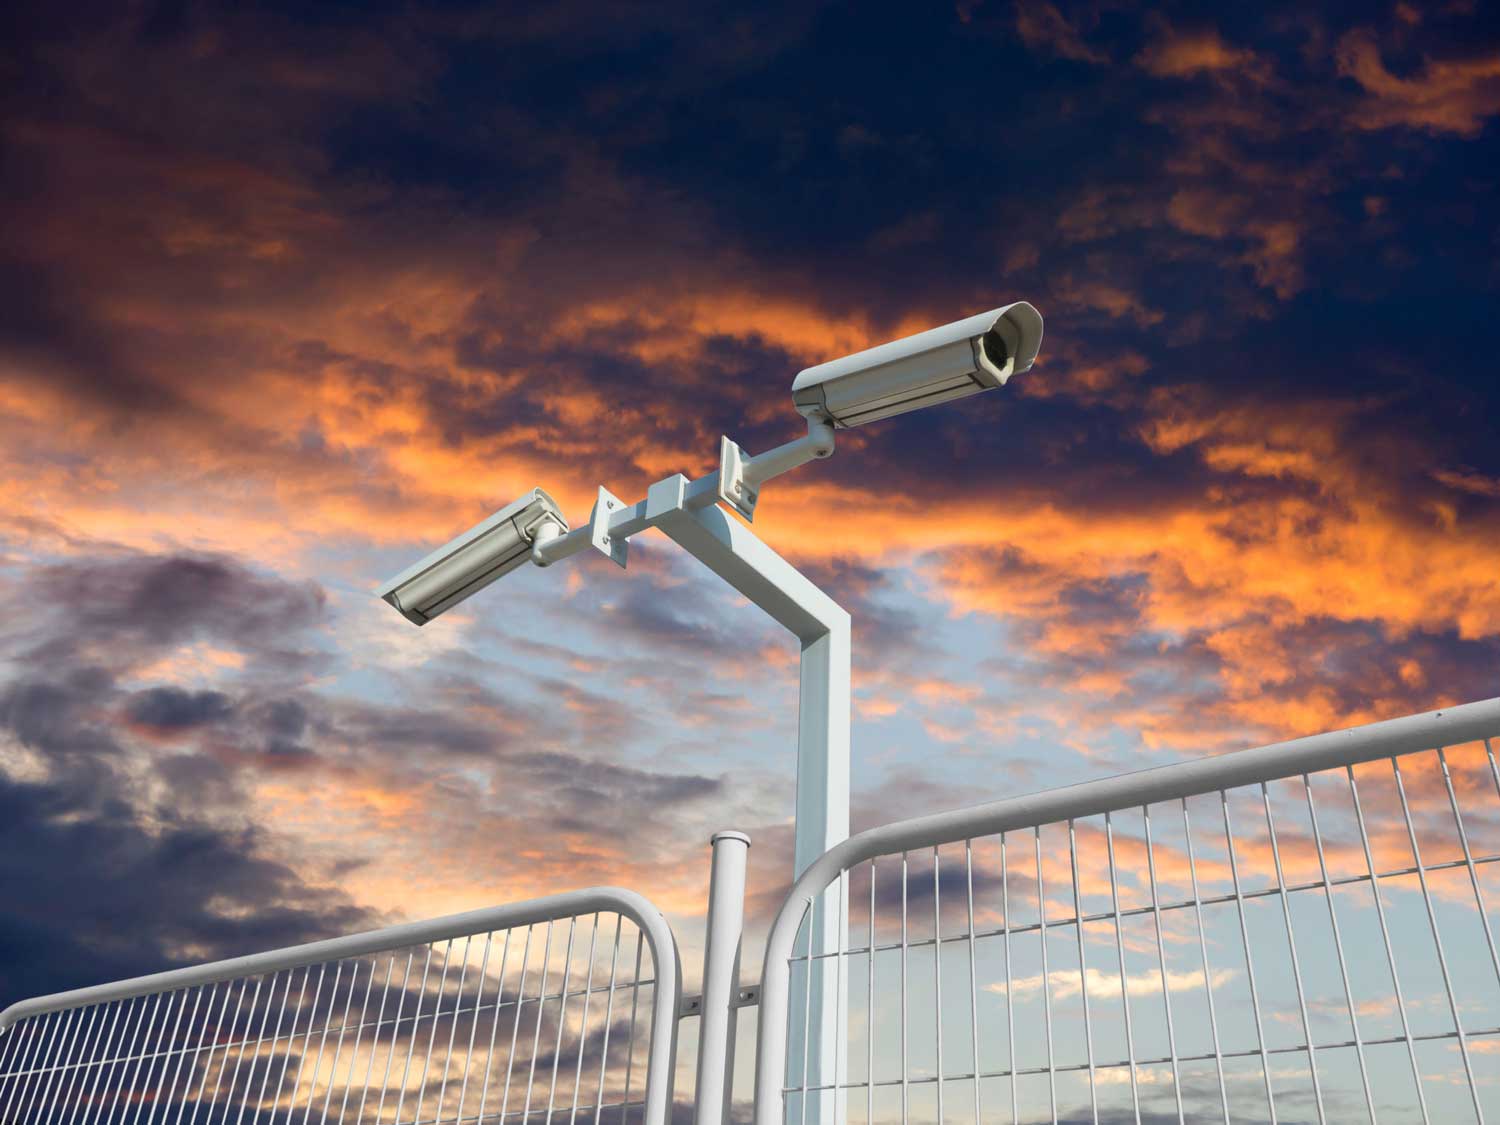 Why Are Weatherproof Security Cameras Important?